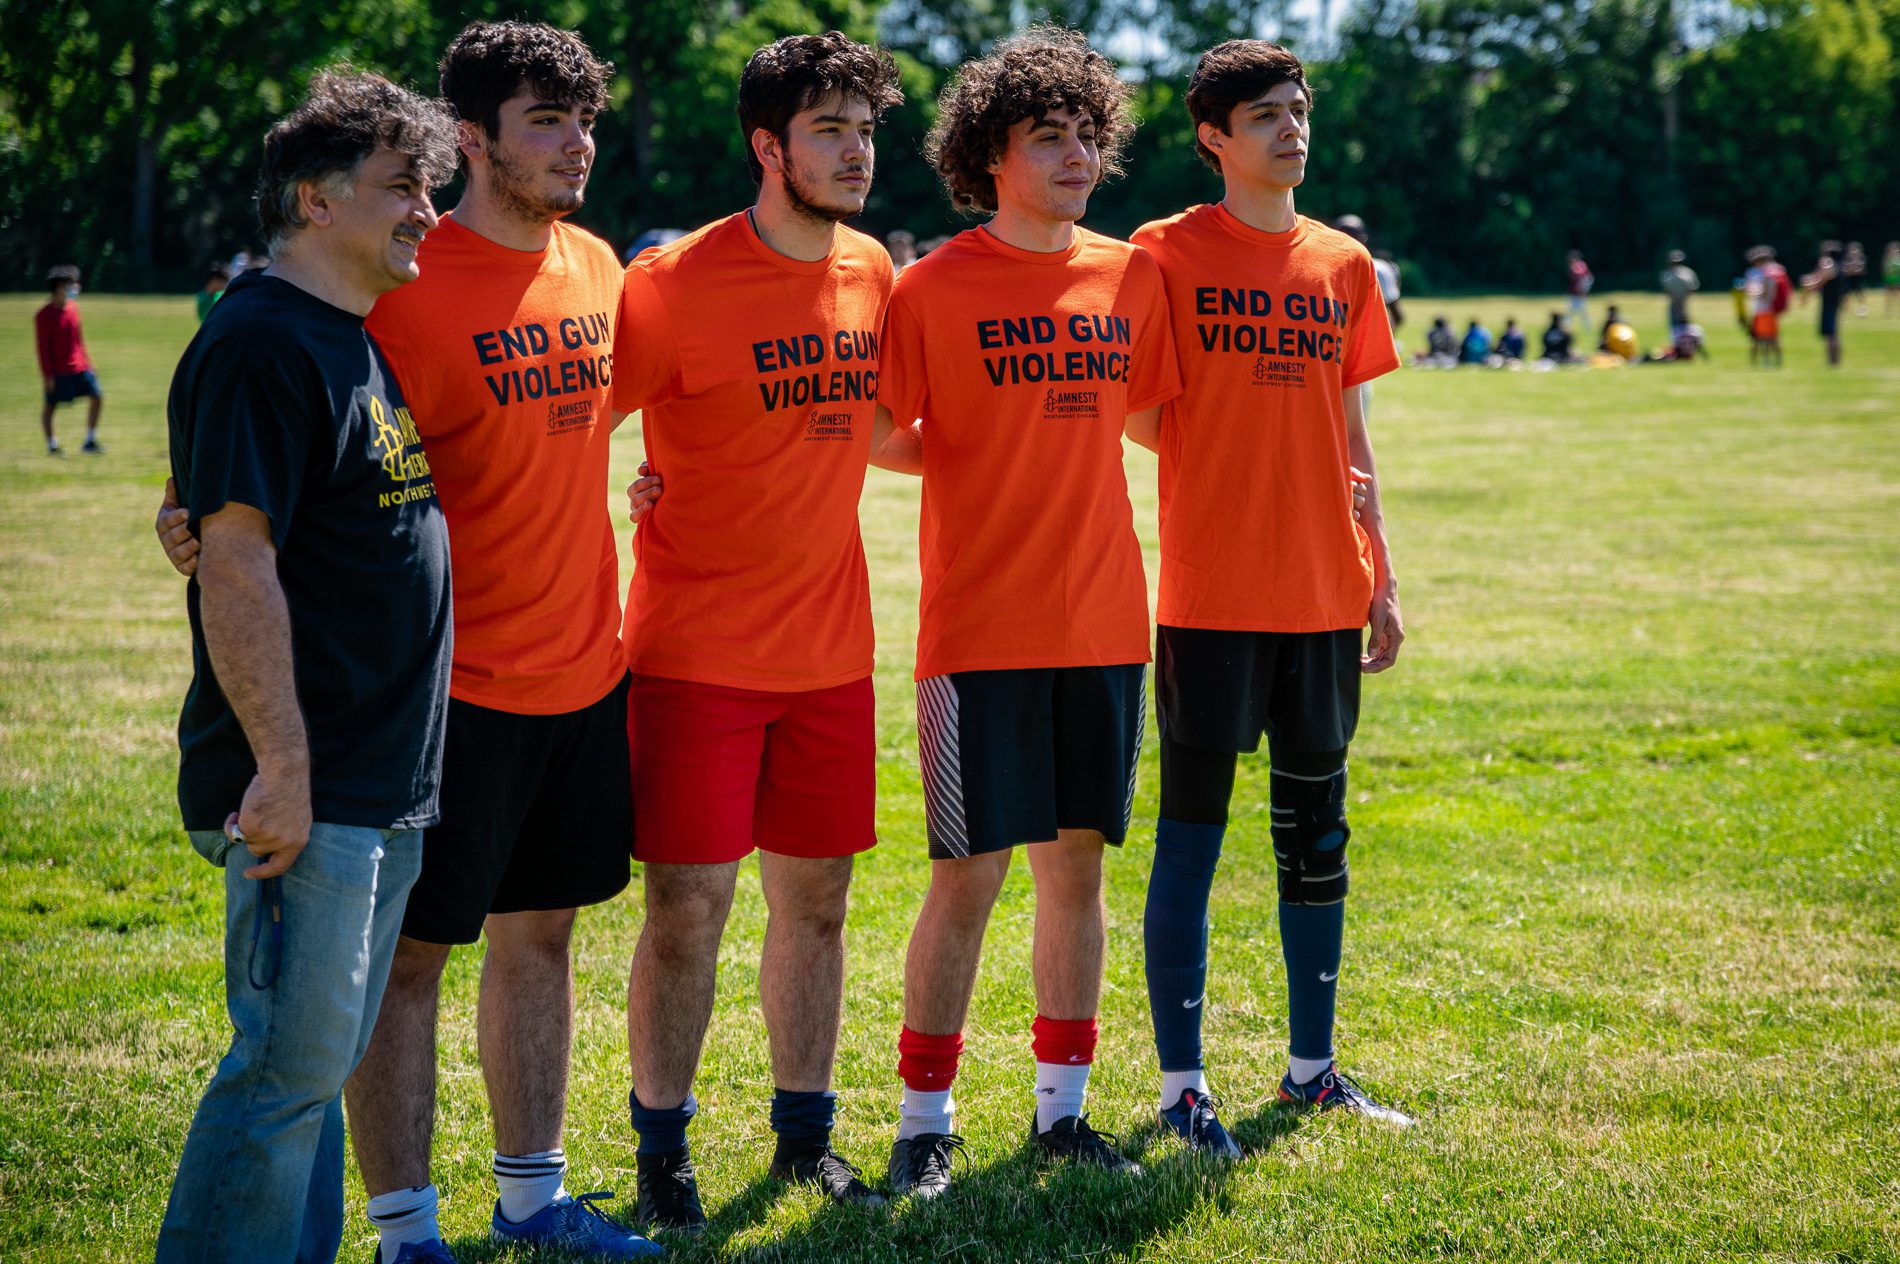 four soccer players wearing orange shirts that read"end fun violence"